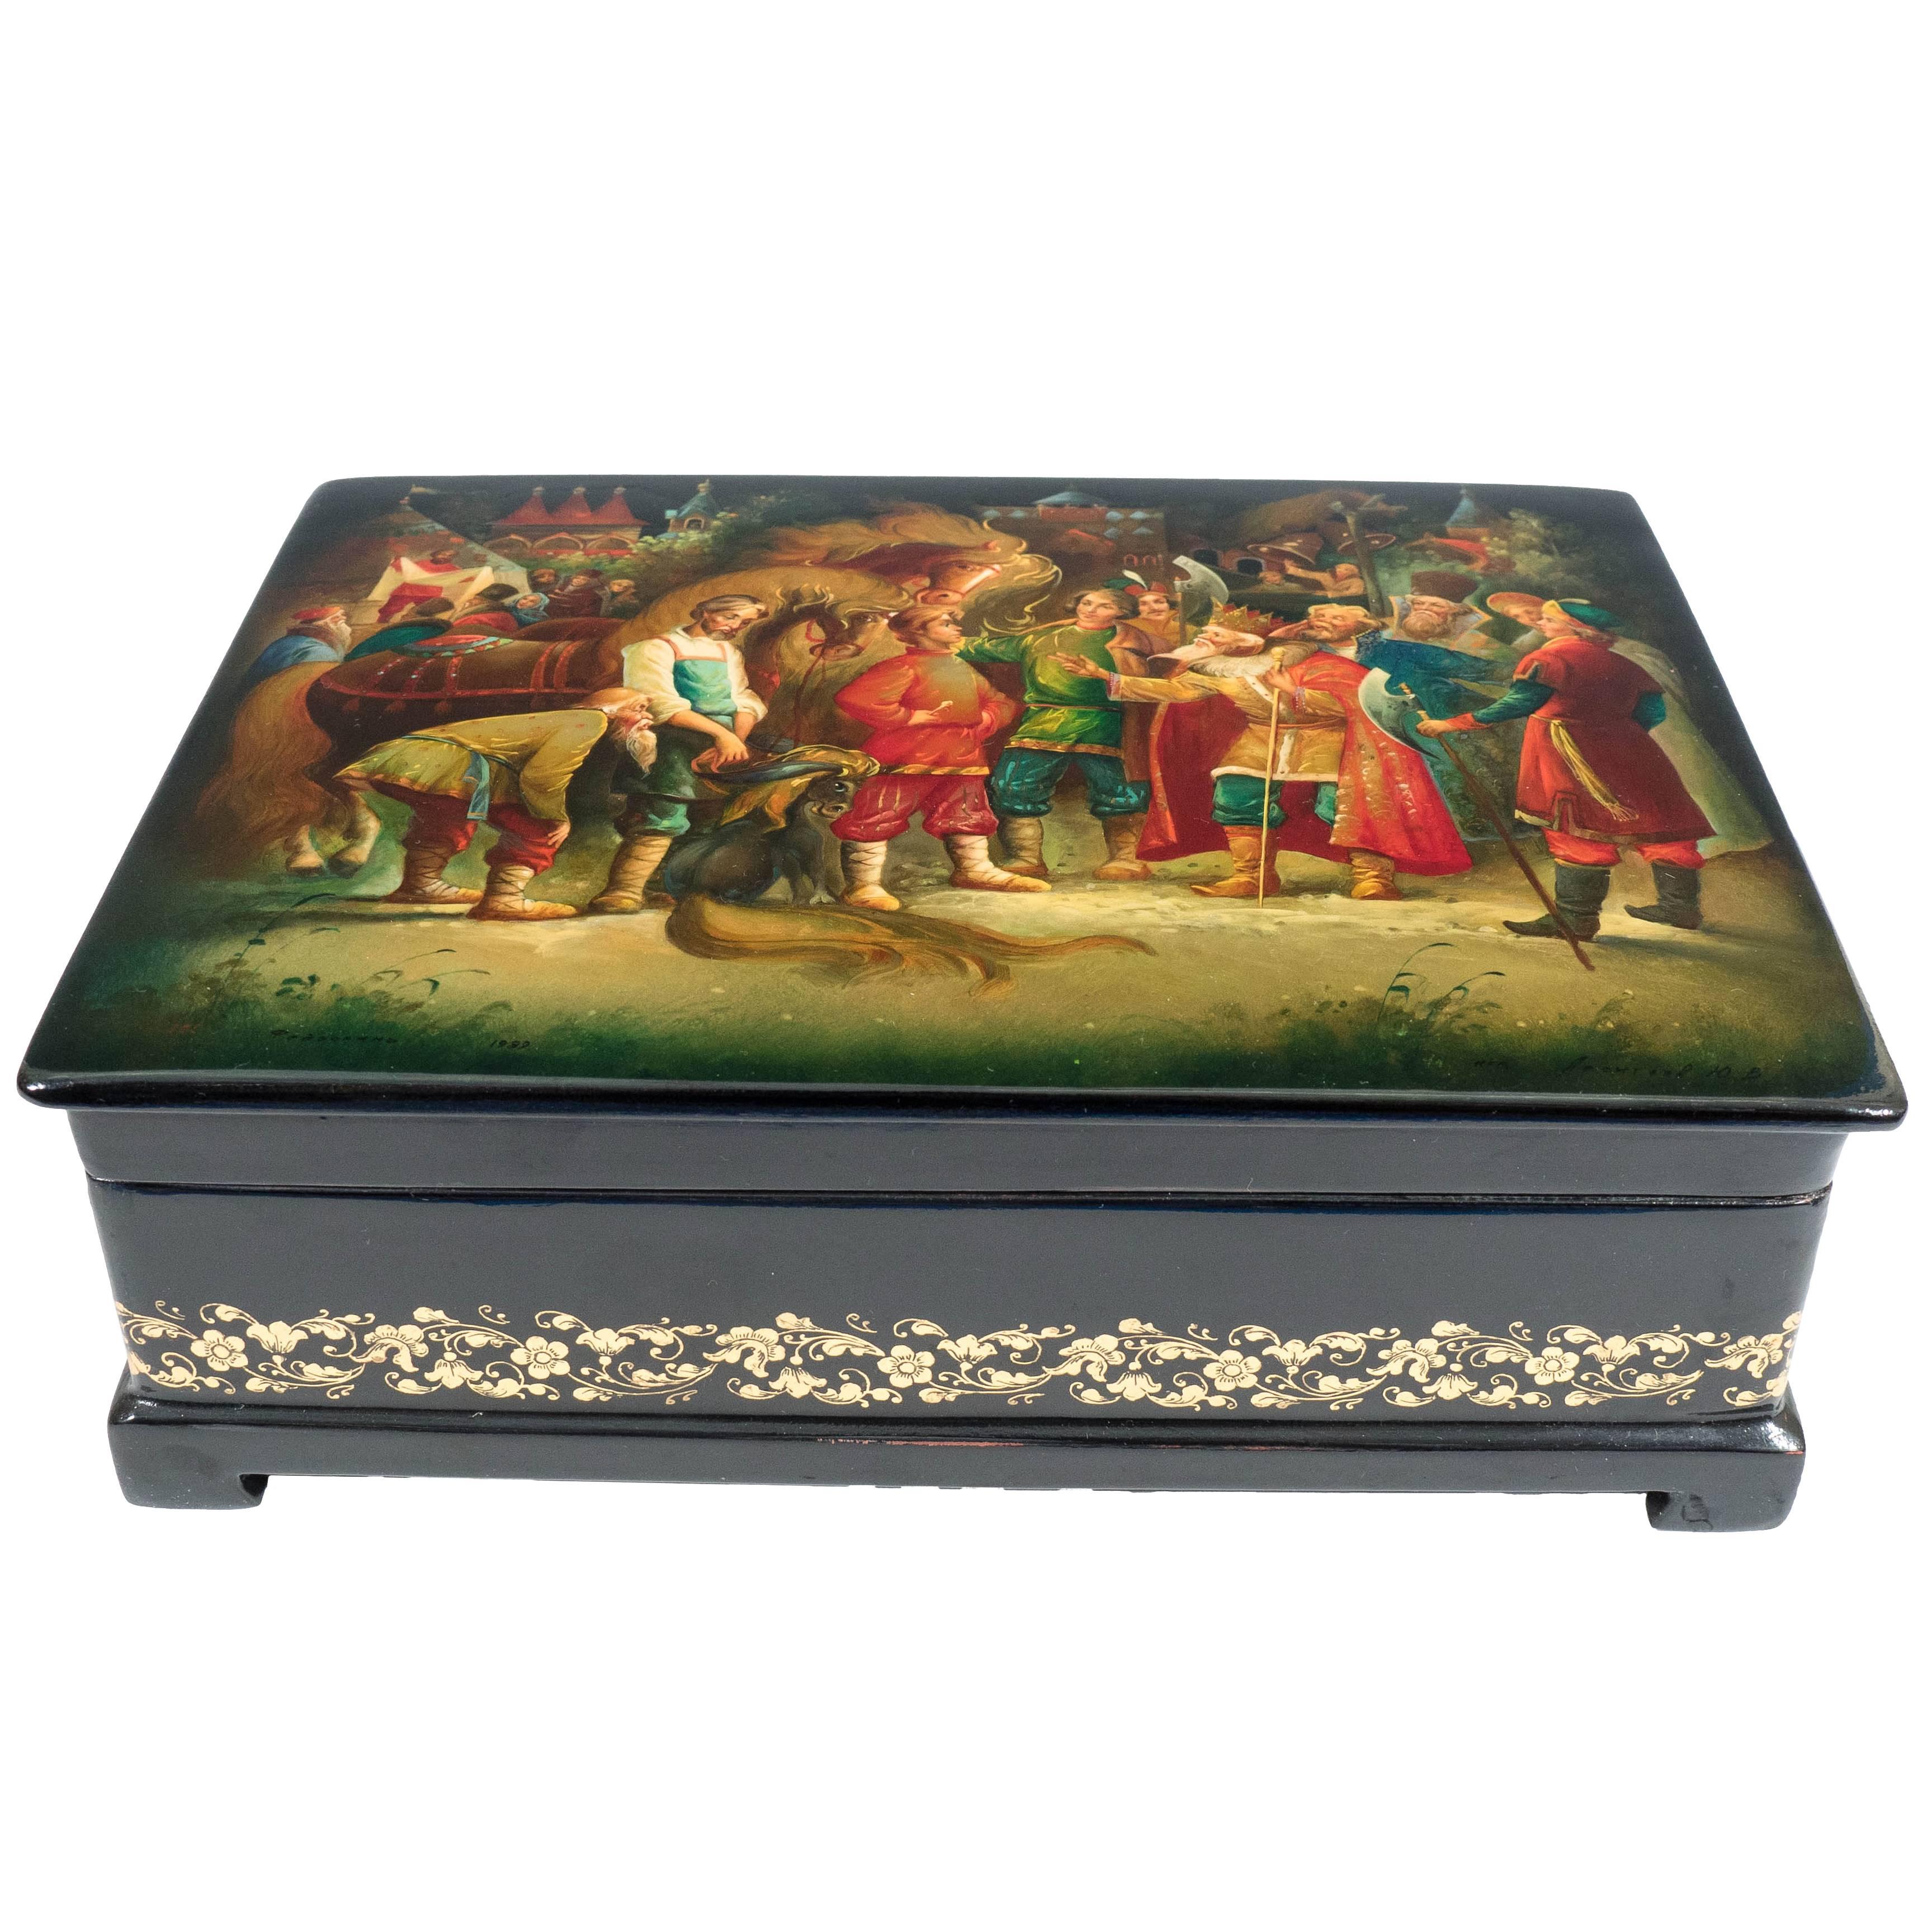 Russian Fedoskino Painted Black Lacquer Box, Signed and Dated 1989